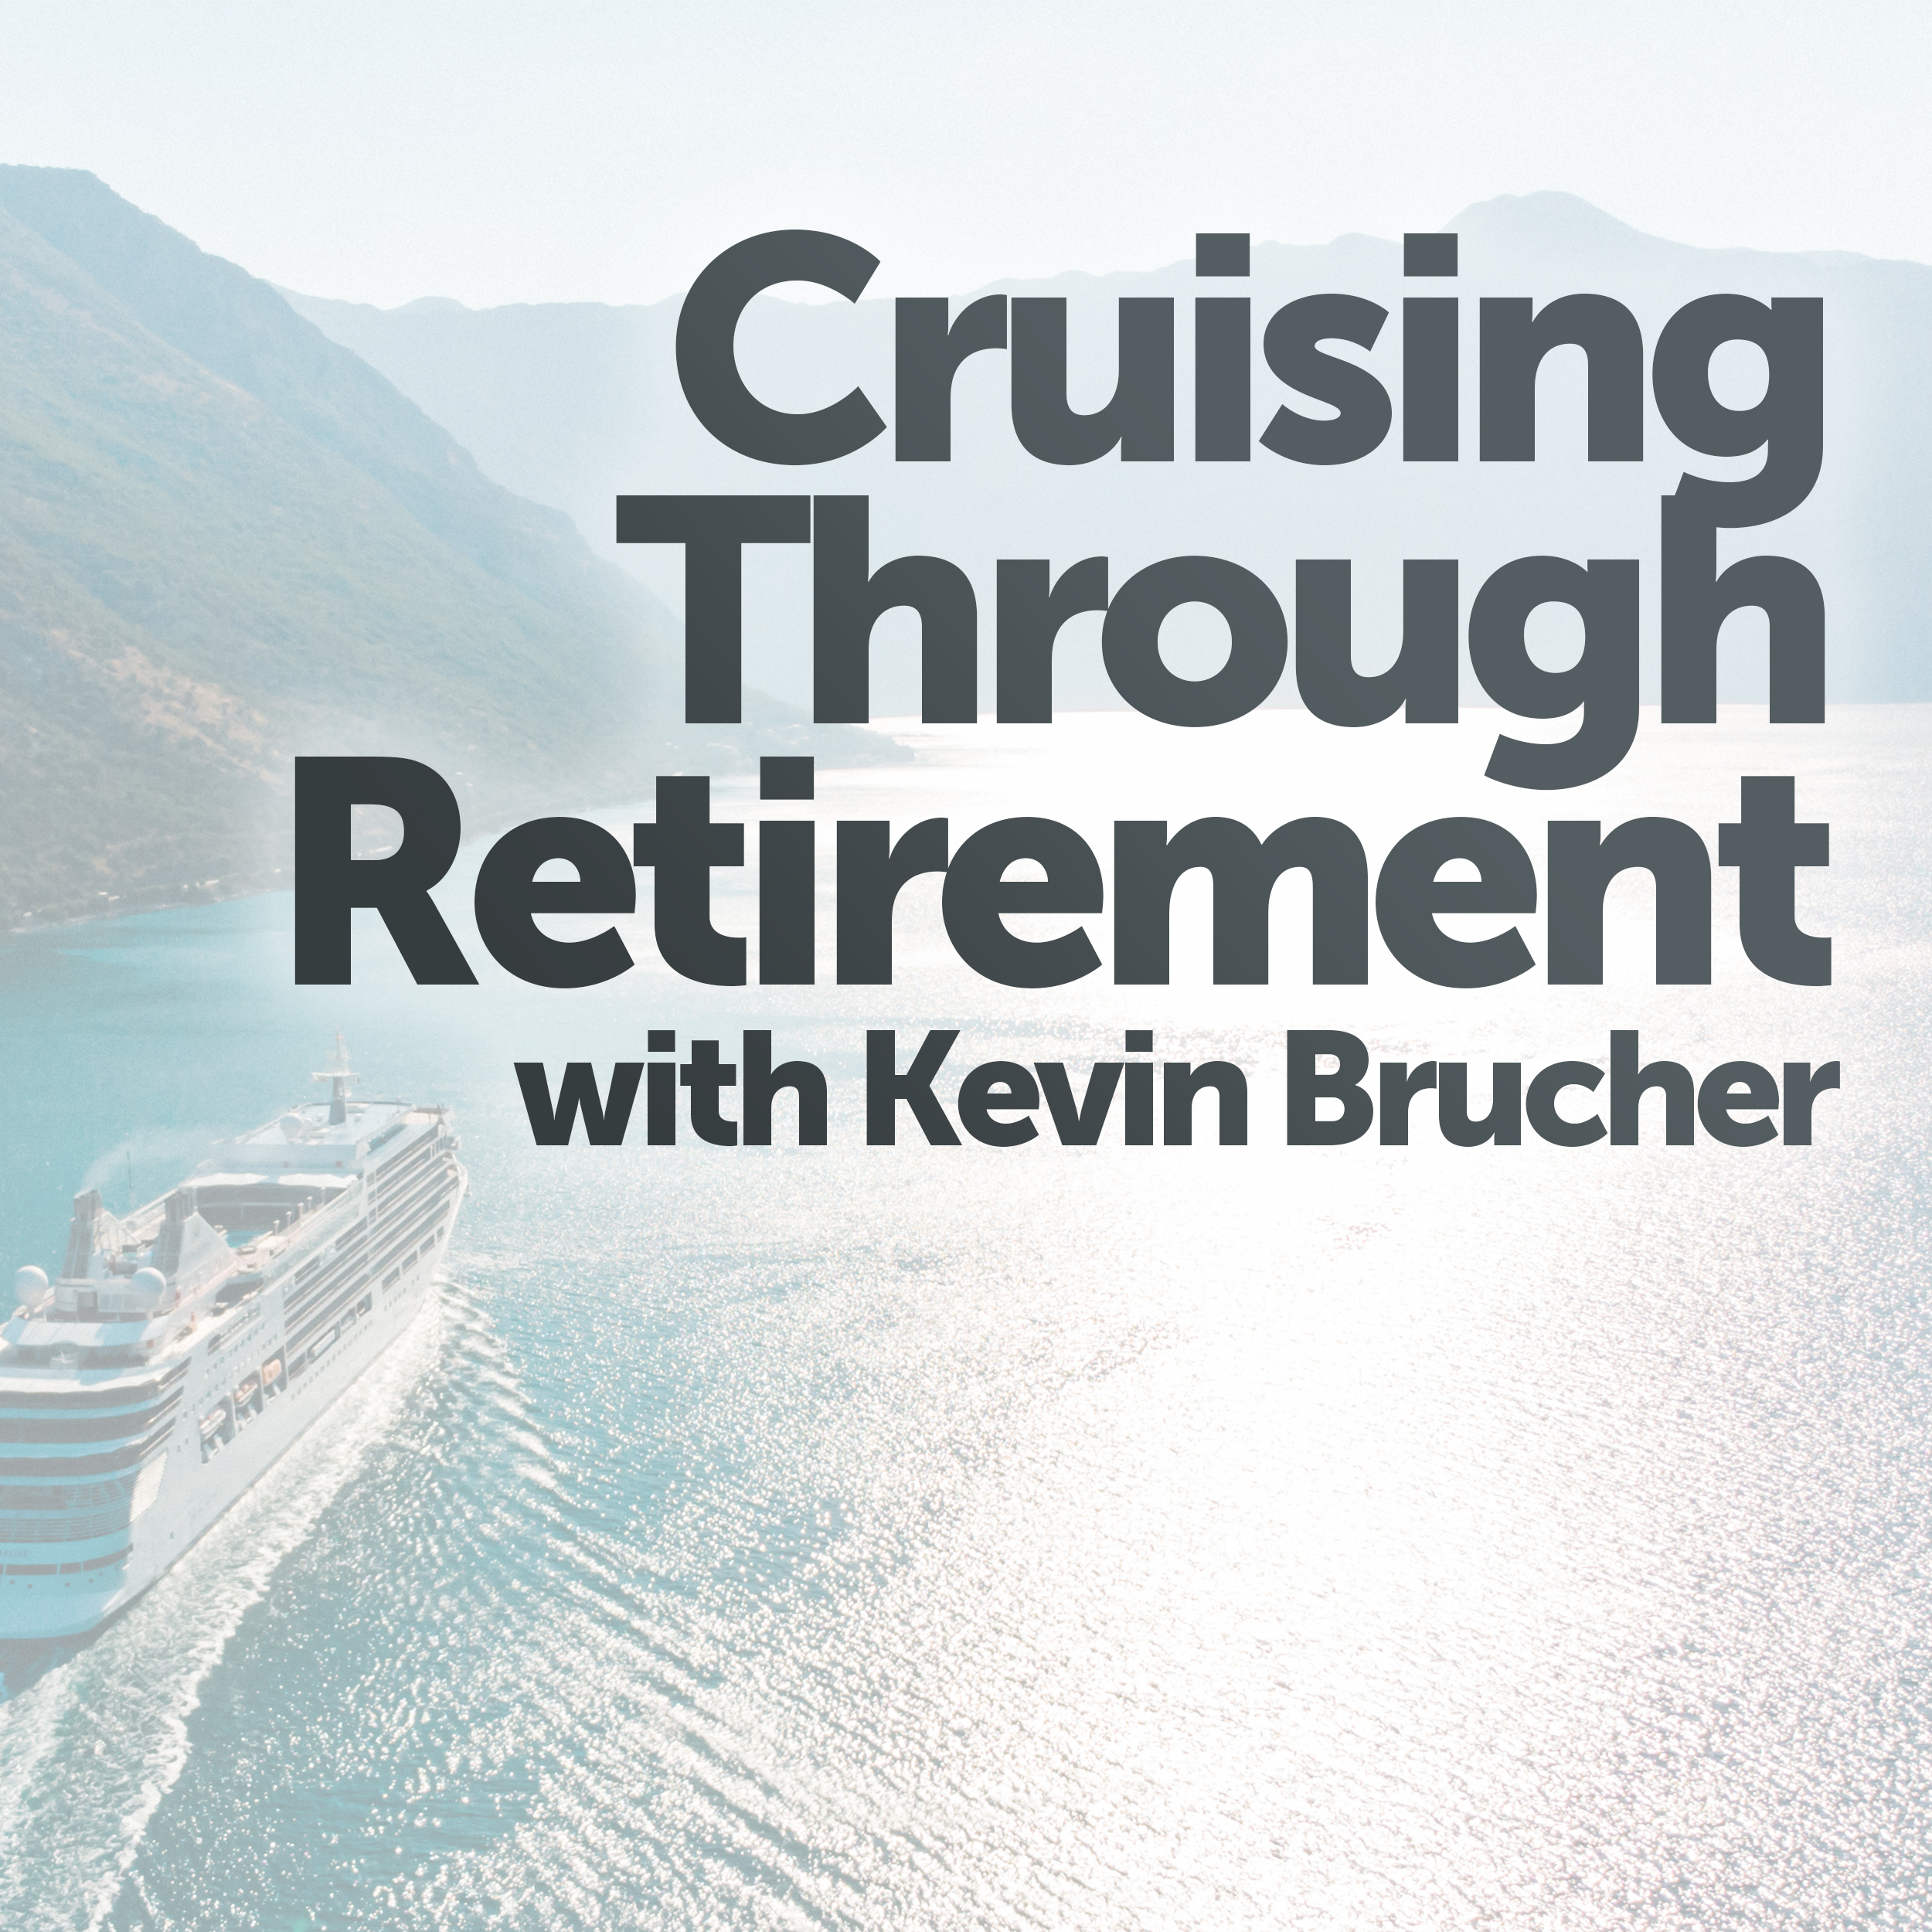 Cruising Through Retirement This week Kevin Brucher offers some strategies to help you navigate the highest inflation in 40 years, while in retirement.